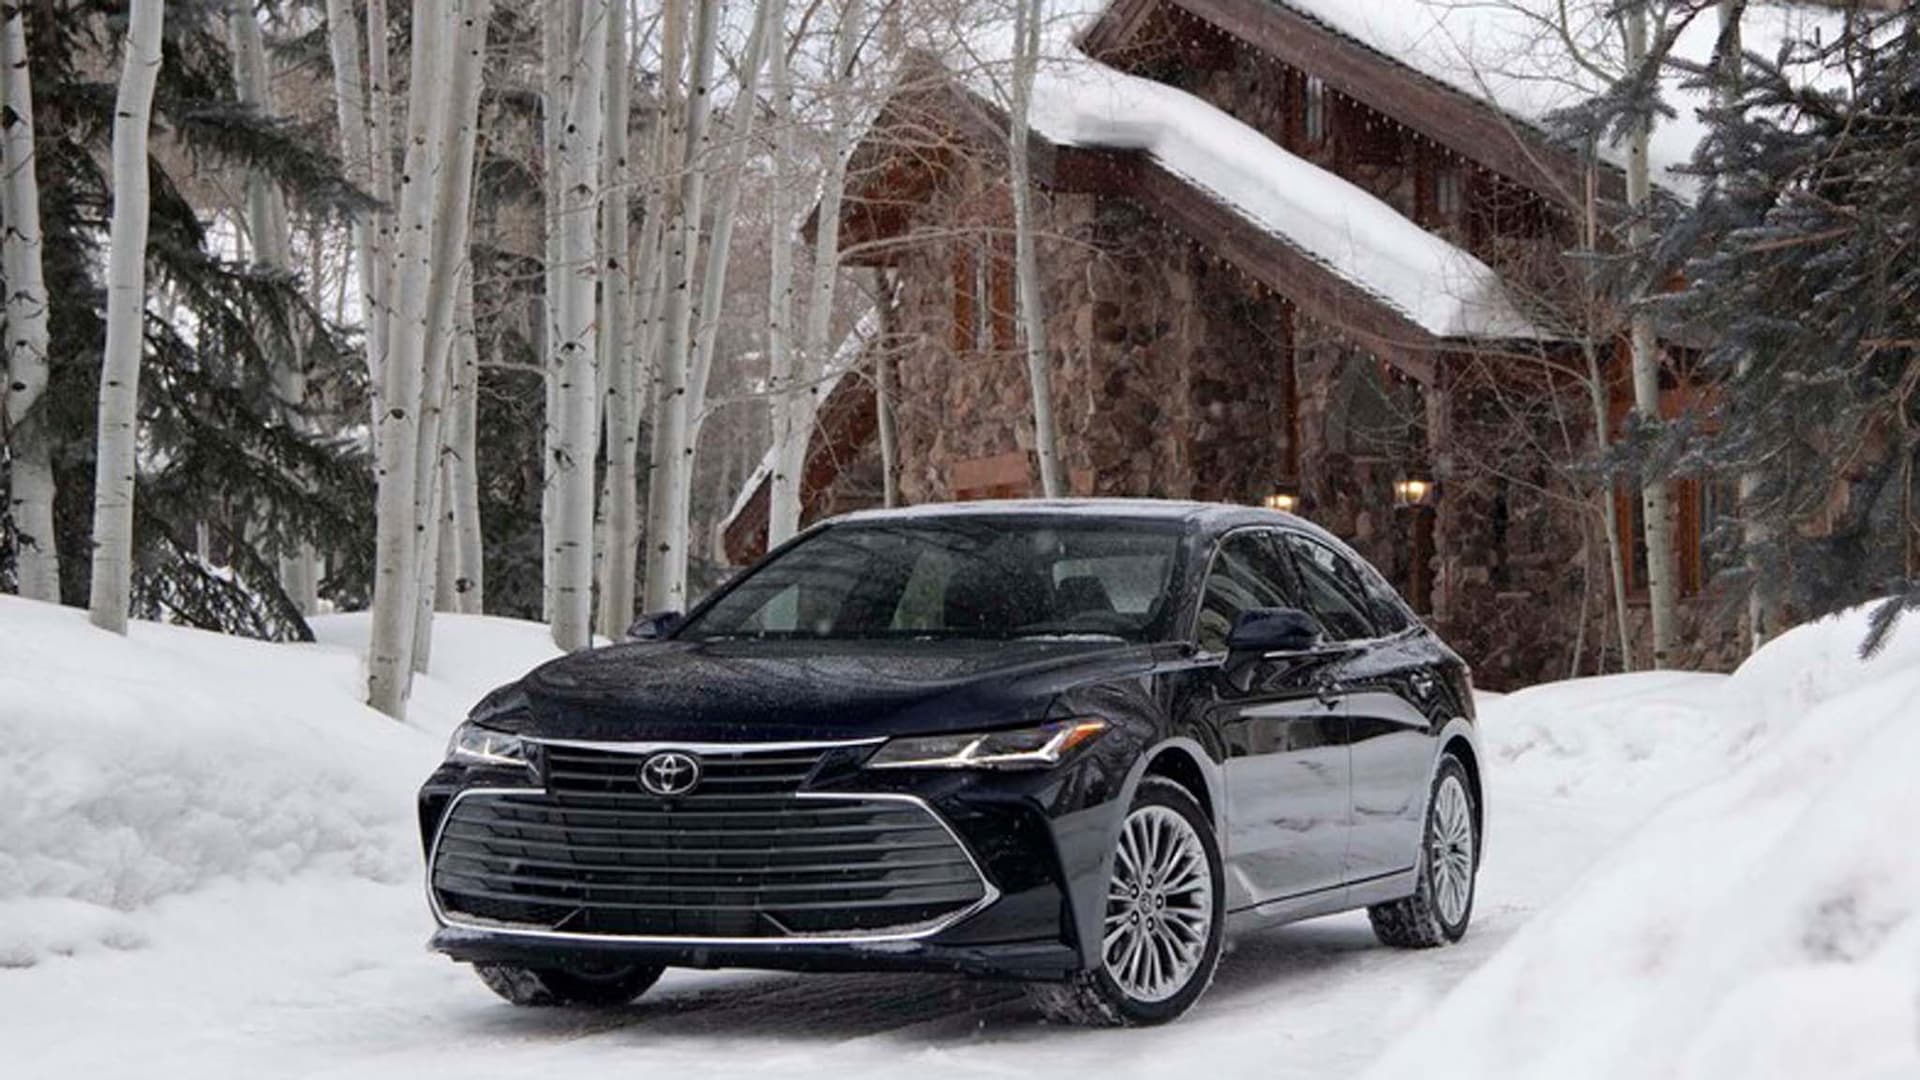 2021 Toyota Avalon Prices, Reviews, and Photos - MotorTrend